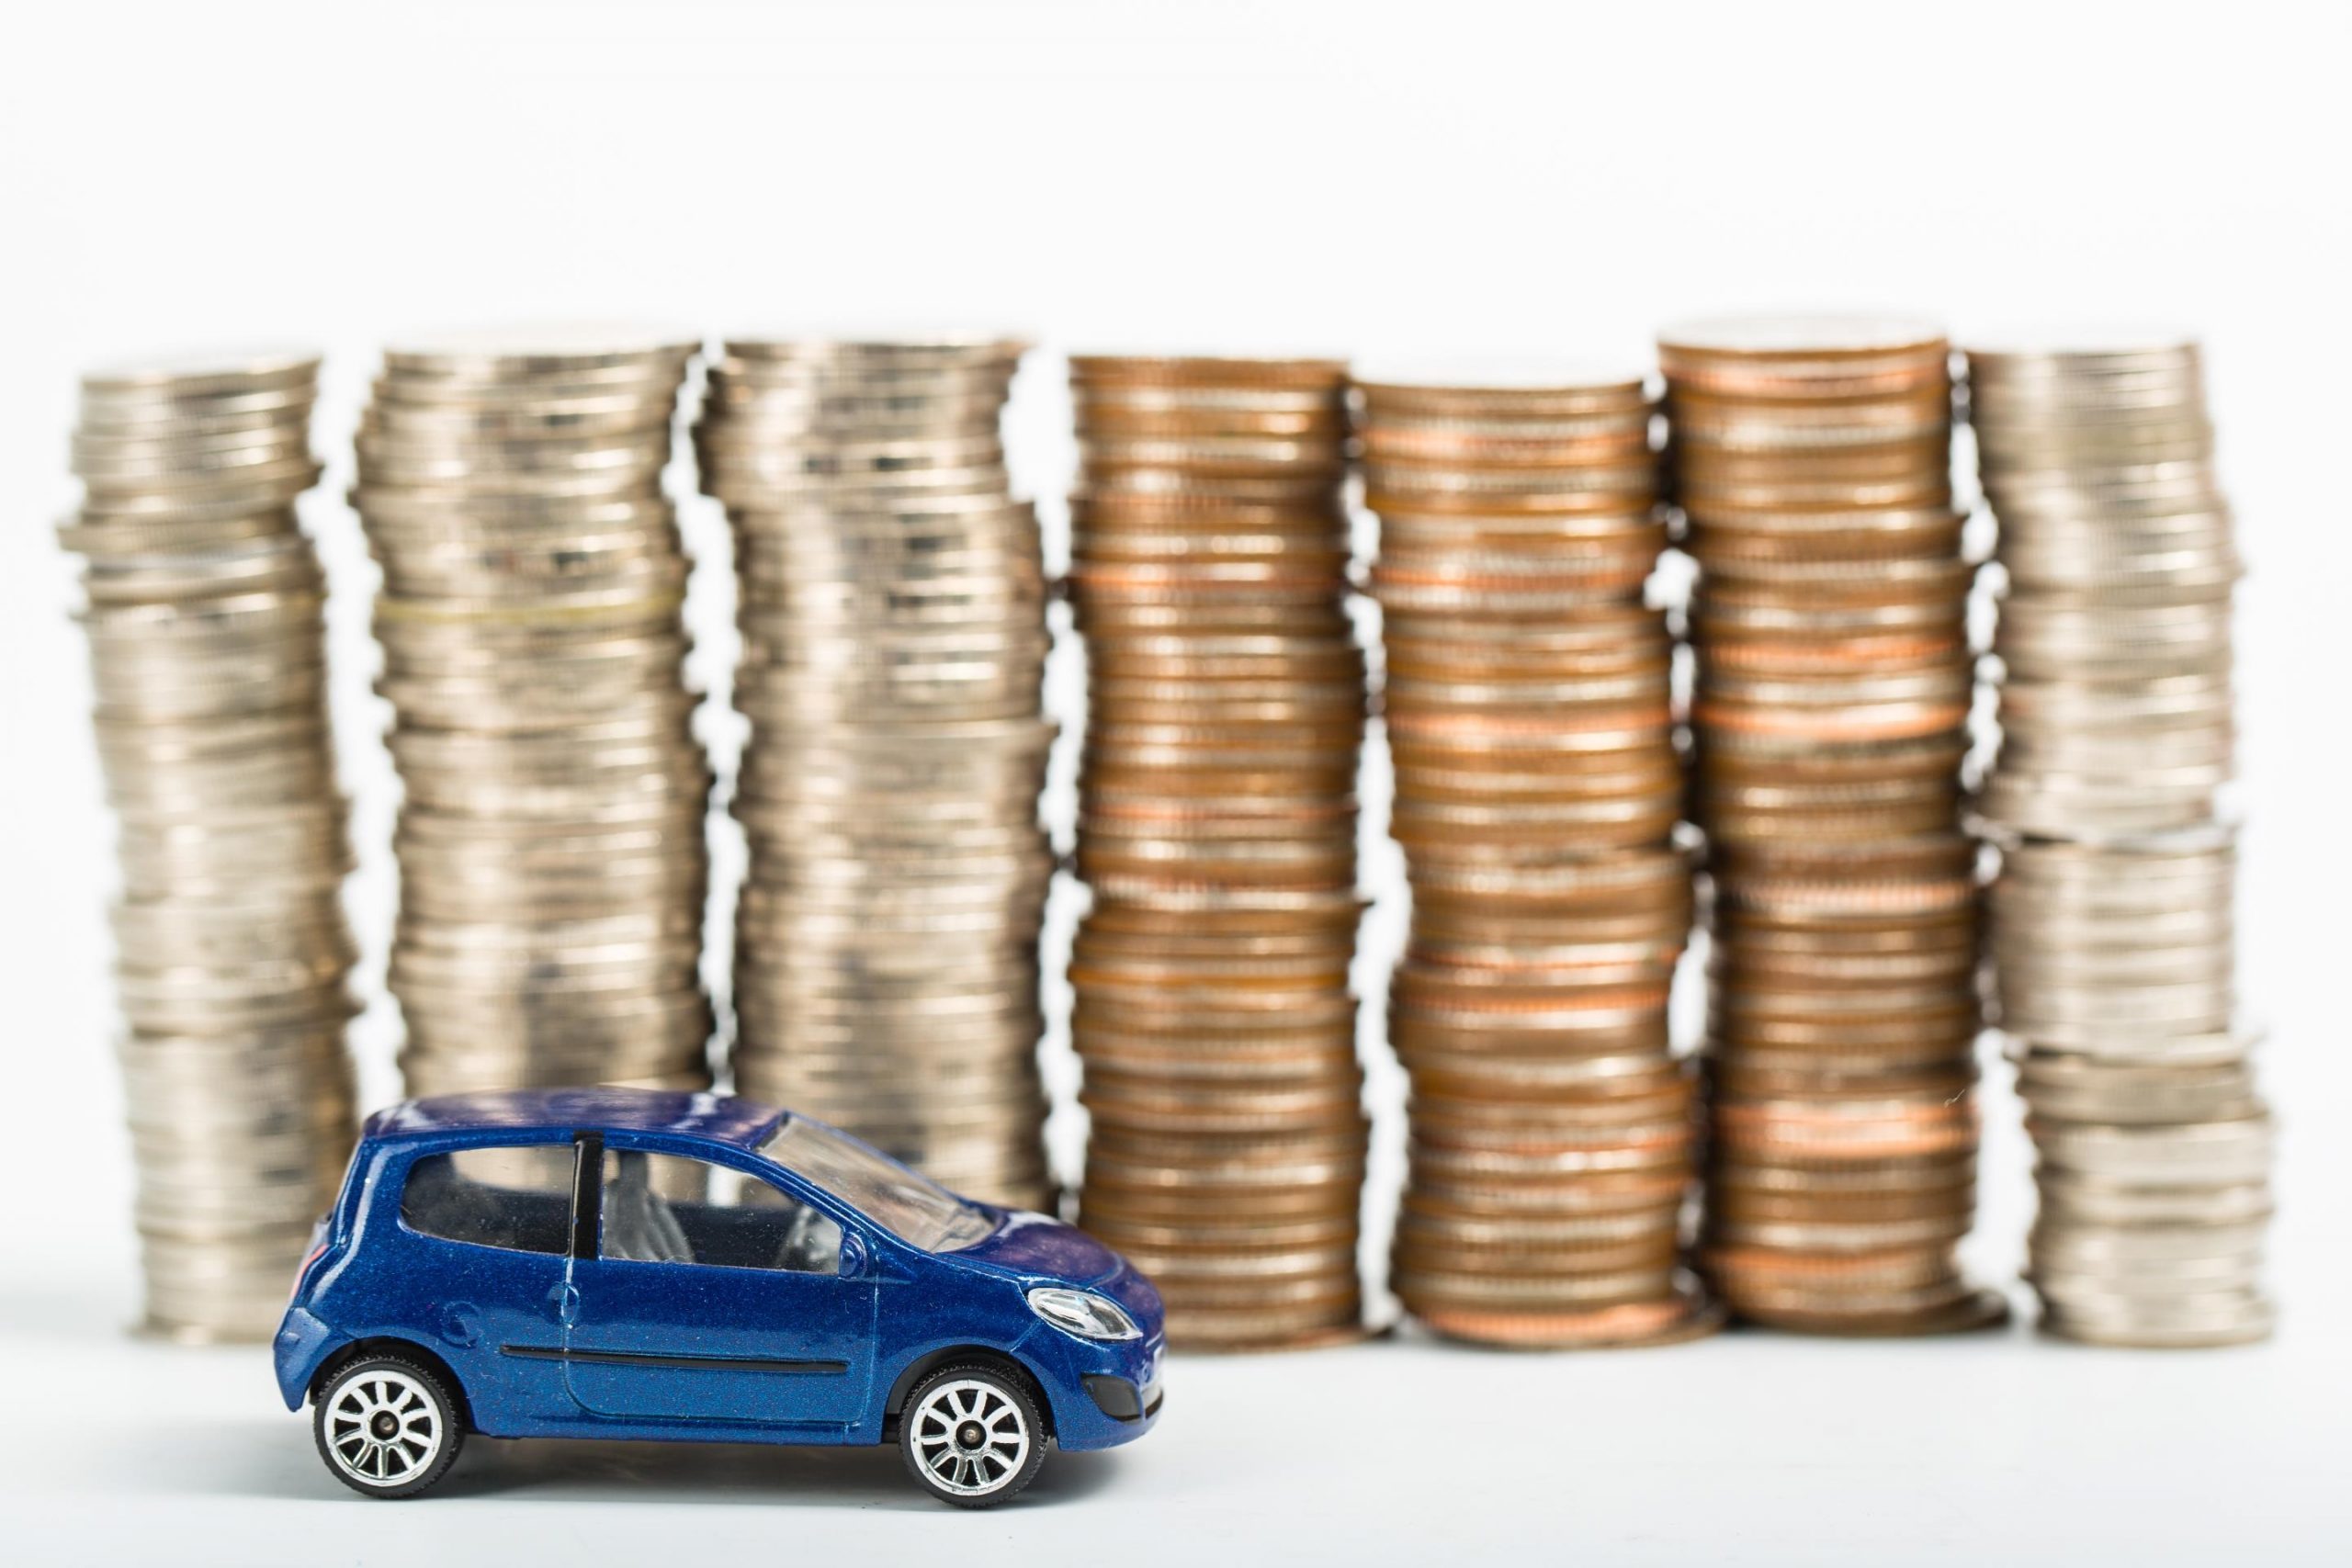 Is there anything in the 2020 Budget about changing car tax?